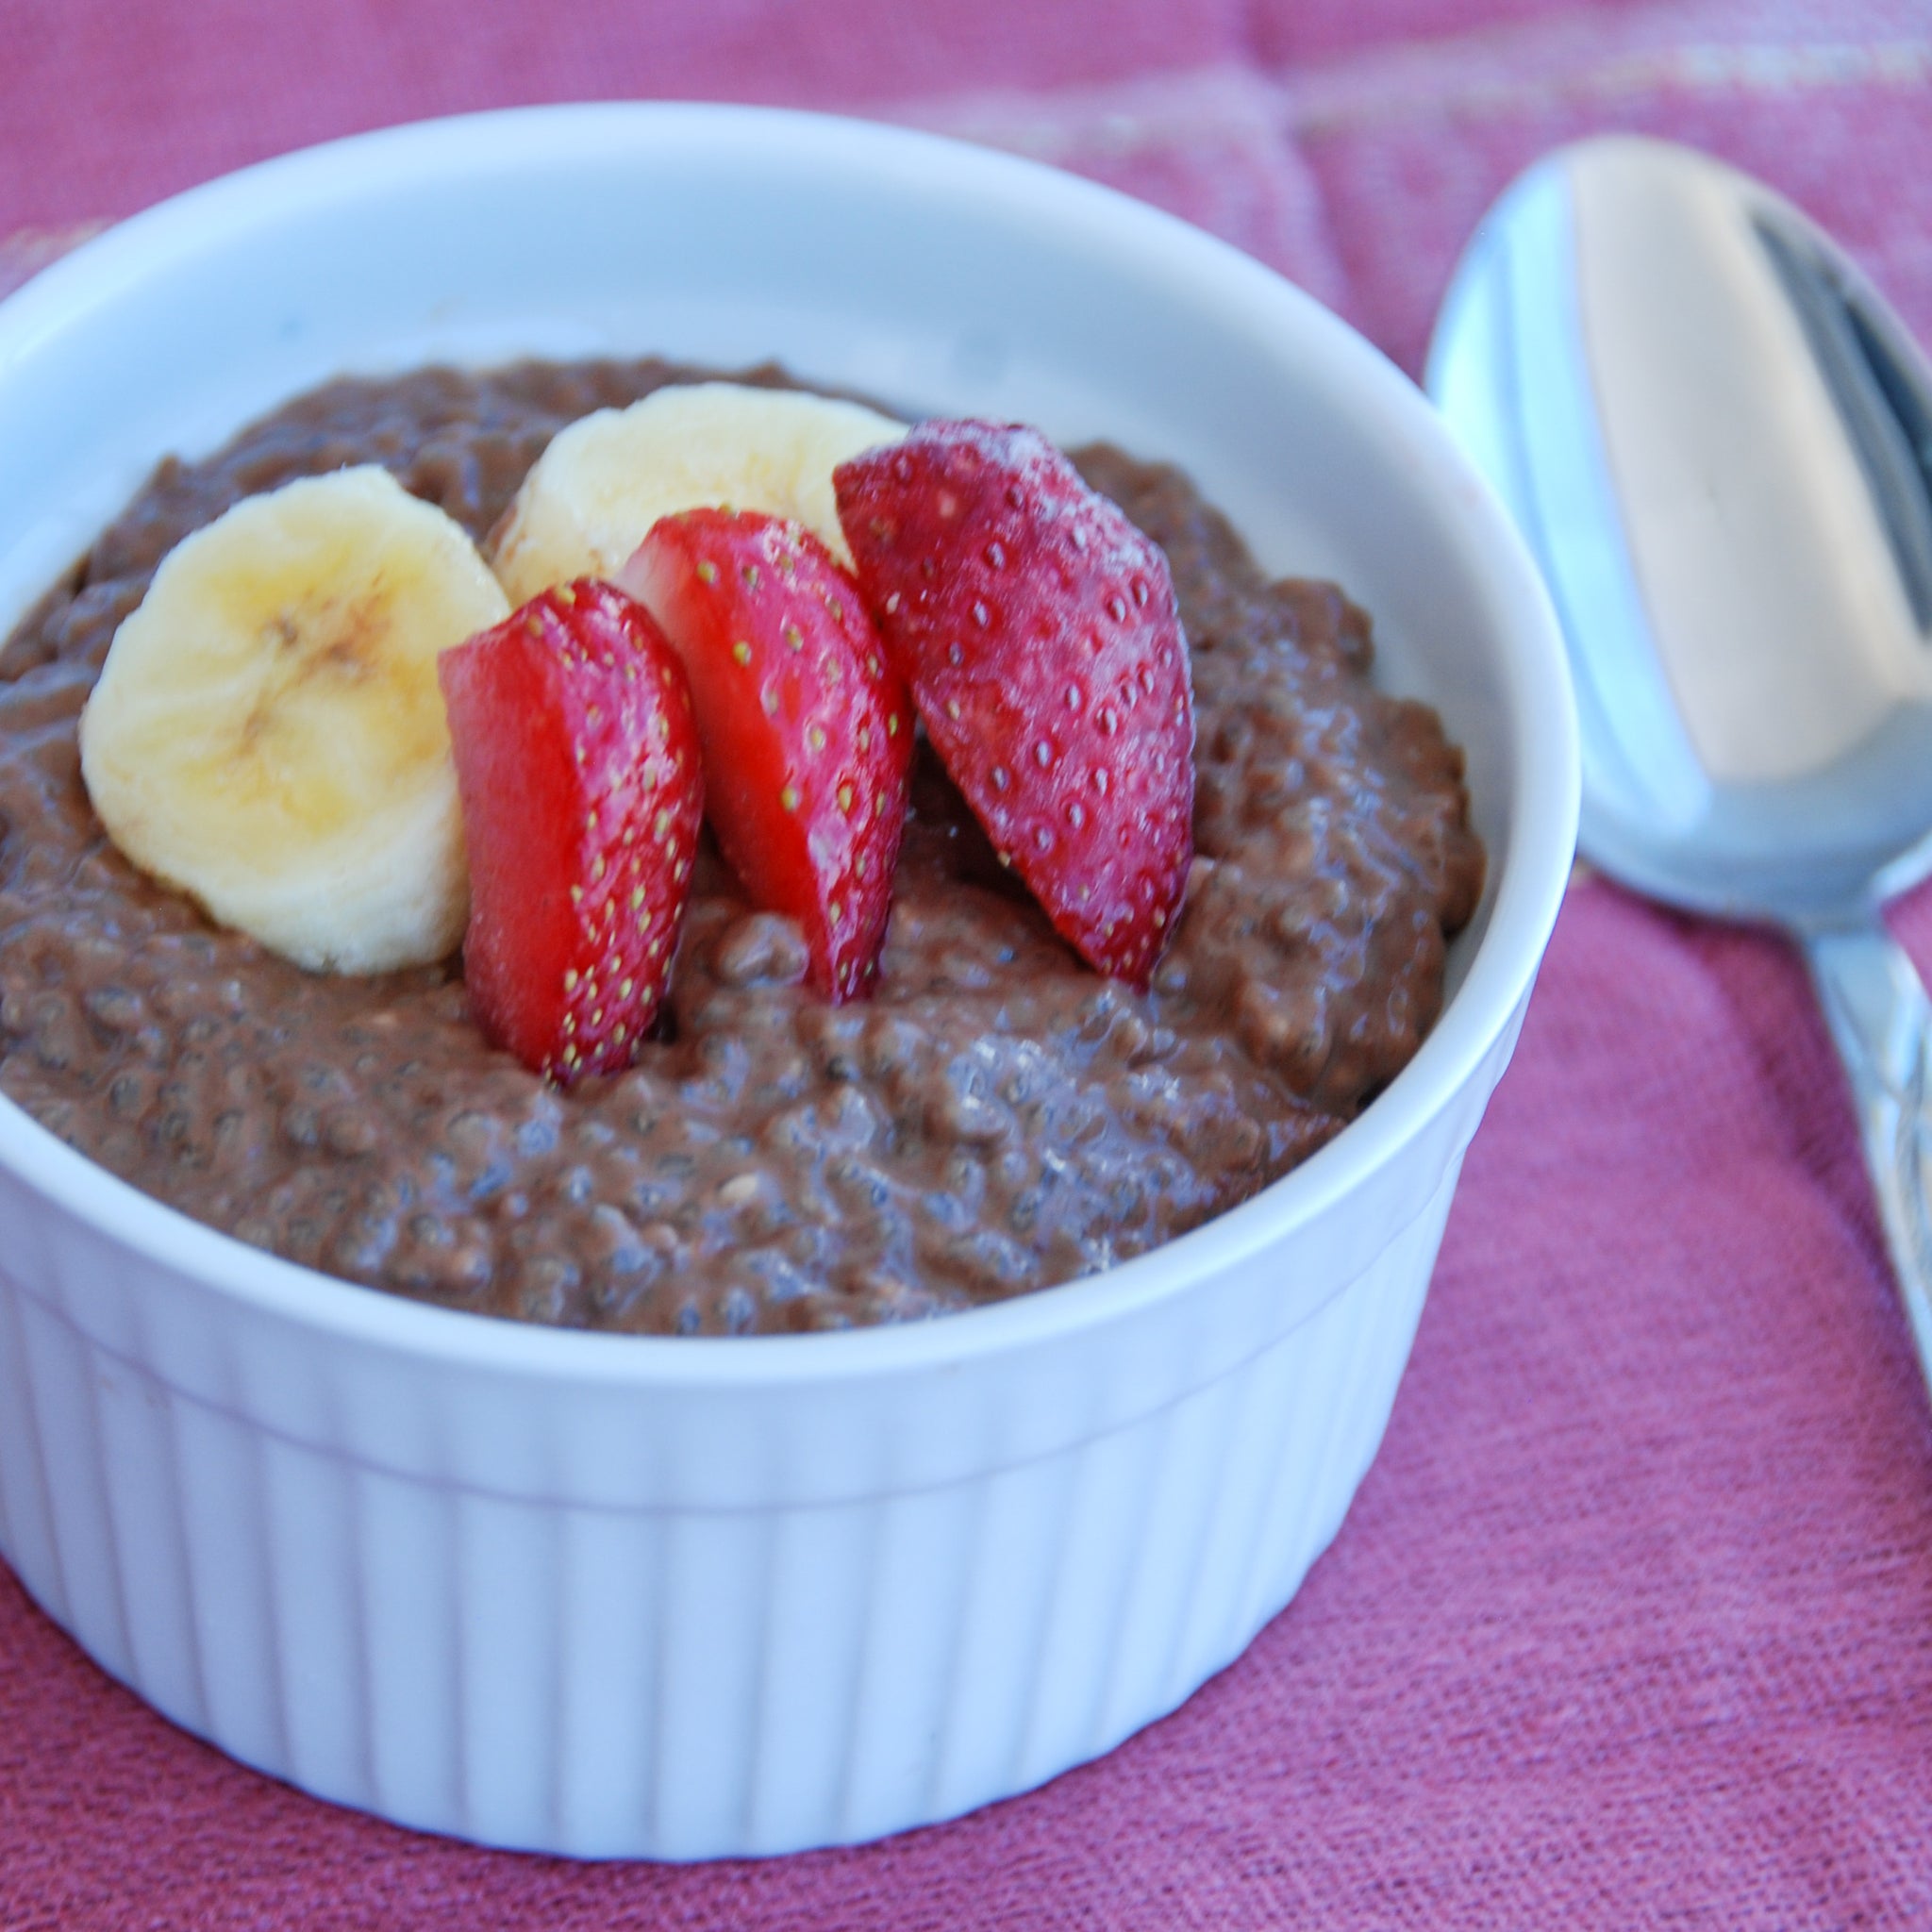 Chocolate Chai Seed Pudding - A Healthy PCOS Snack